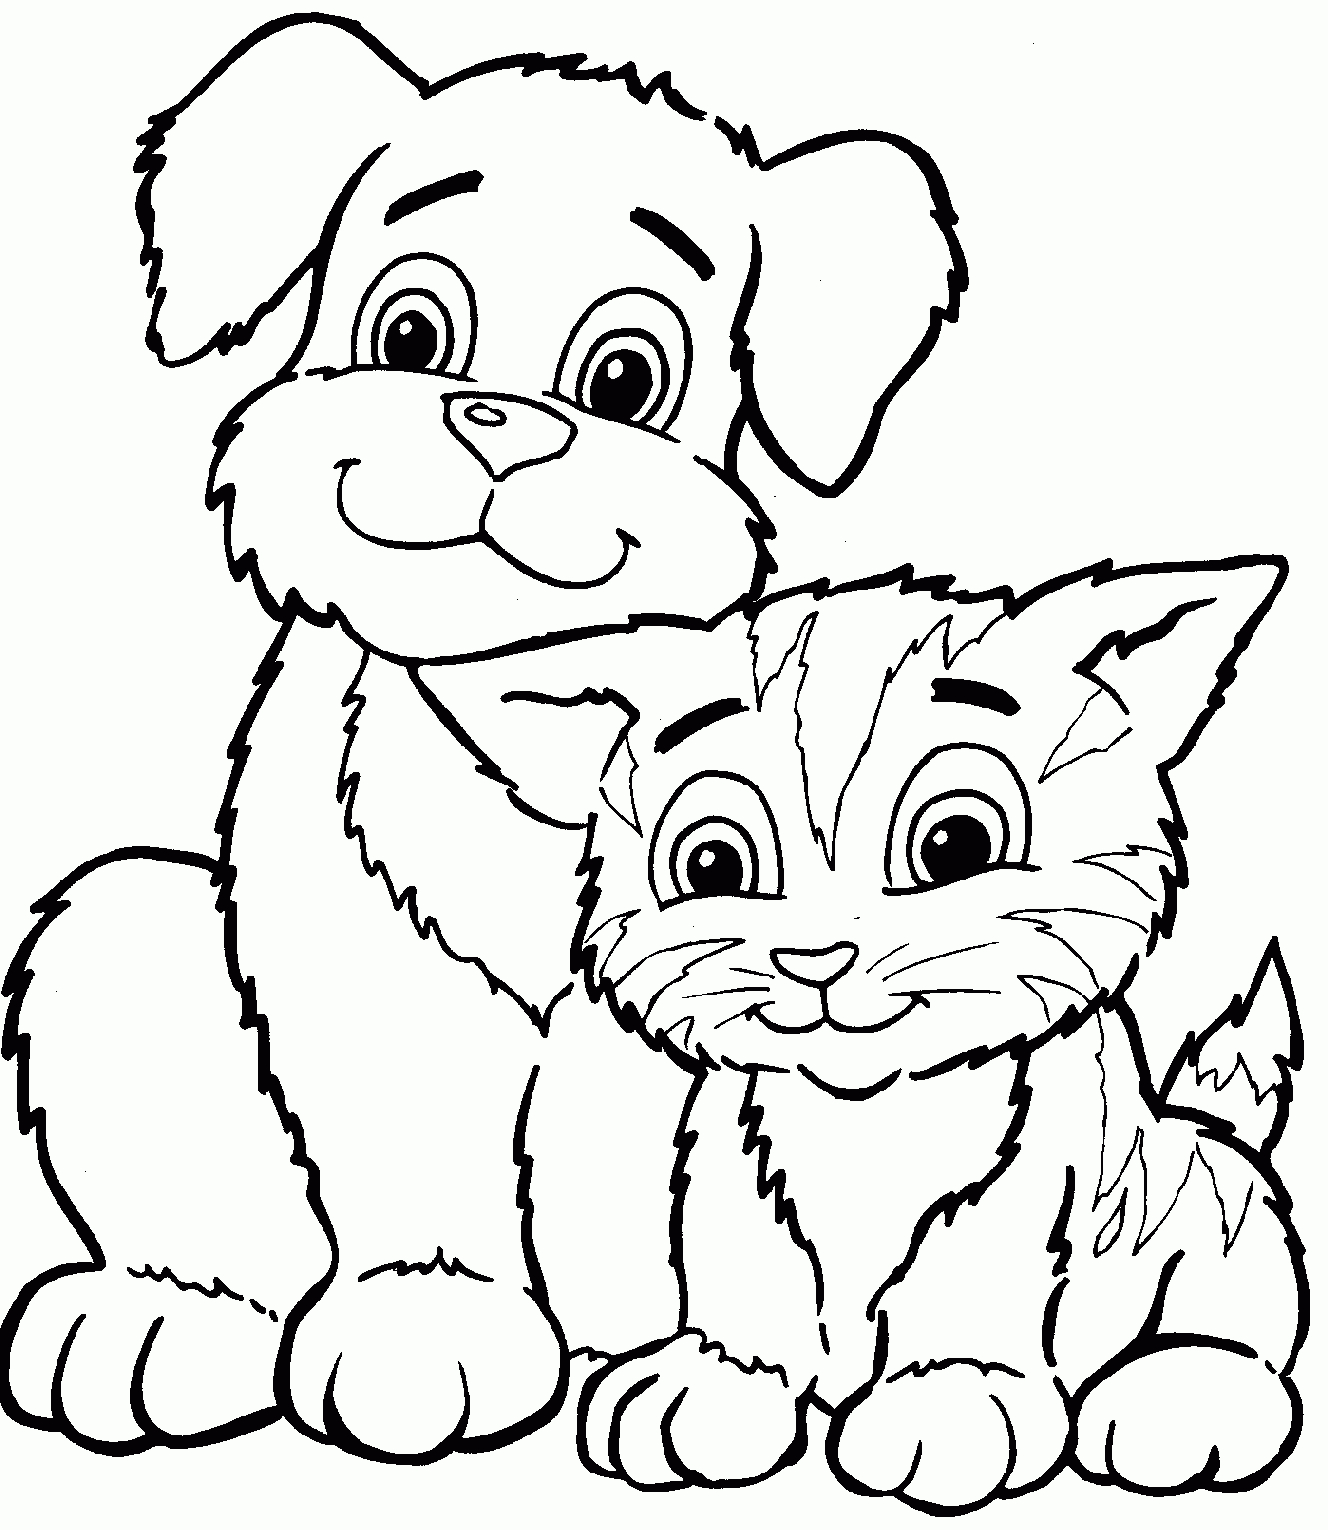 Free Nude Coloring Pages, Download Free Clip Art, Free Clip Art On - Free Printable Coloring Pages For Toddlers